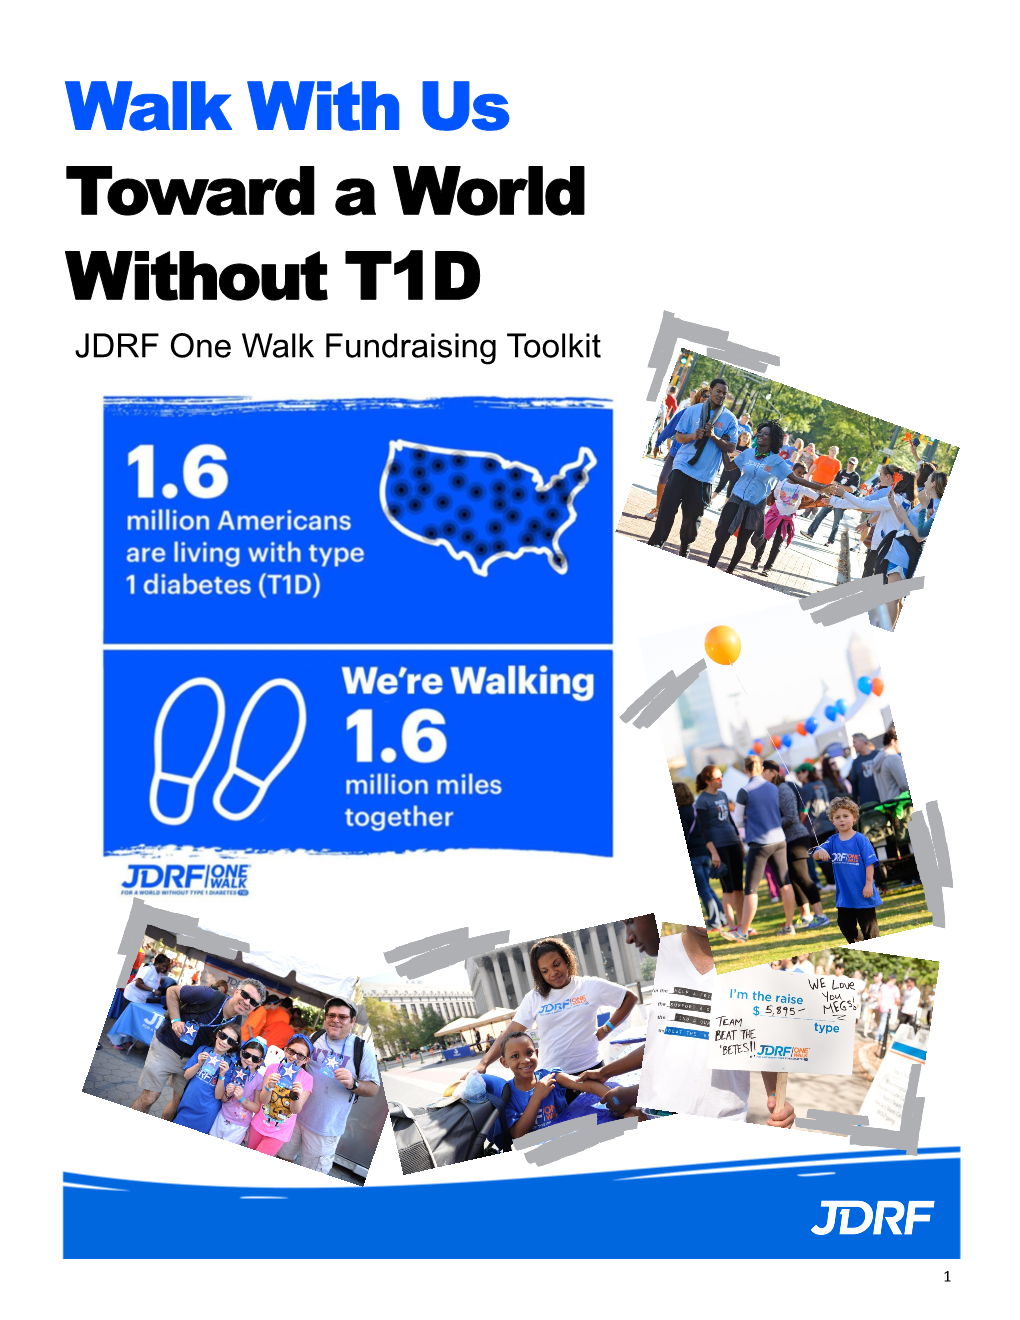 Walk with Us Toward a World Without T1D JDRF One Walk Fundraising Toolkit